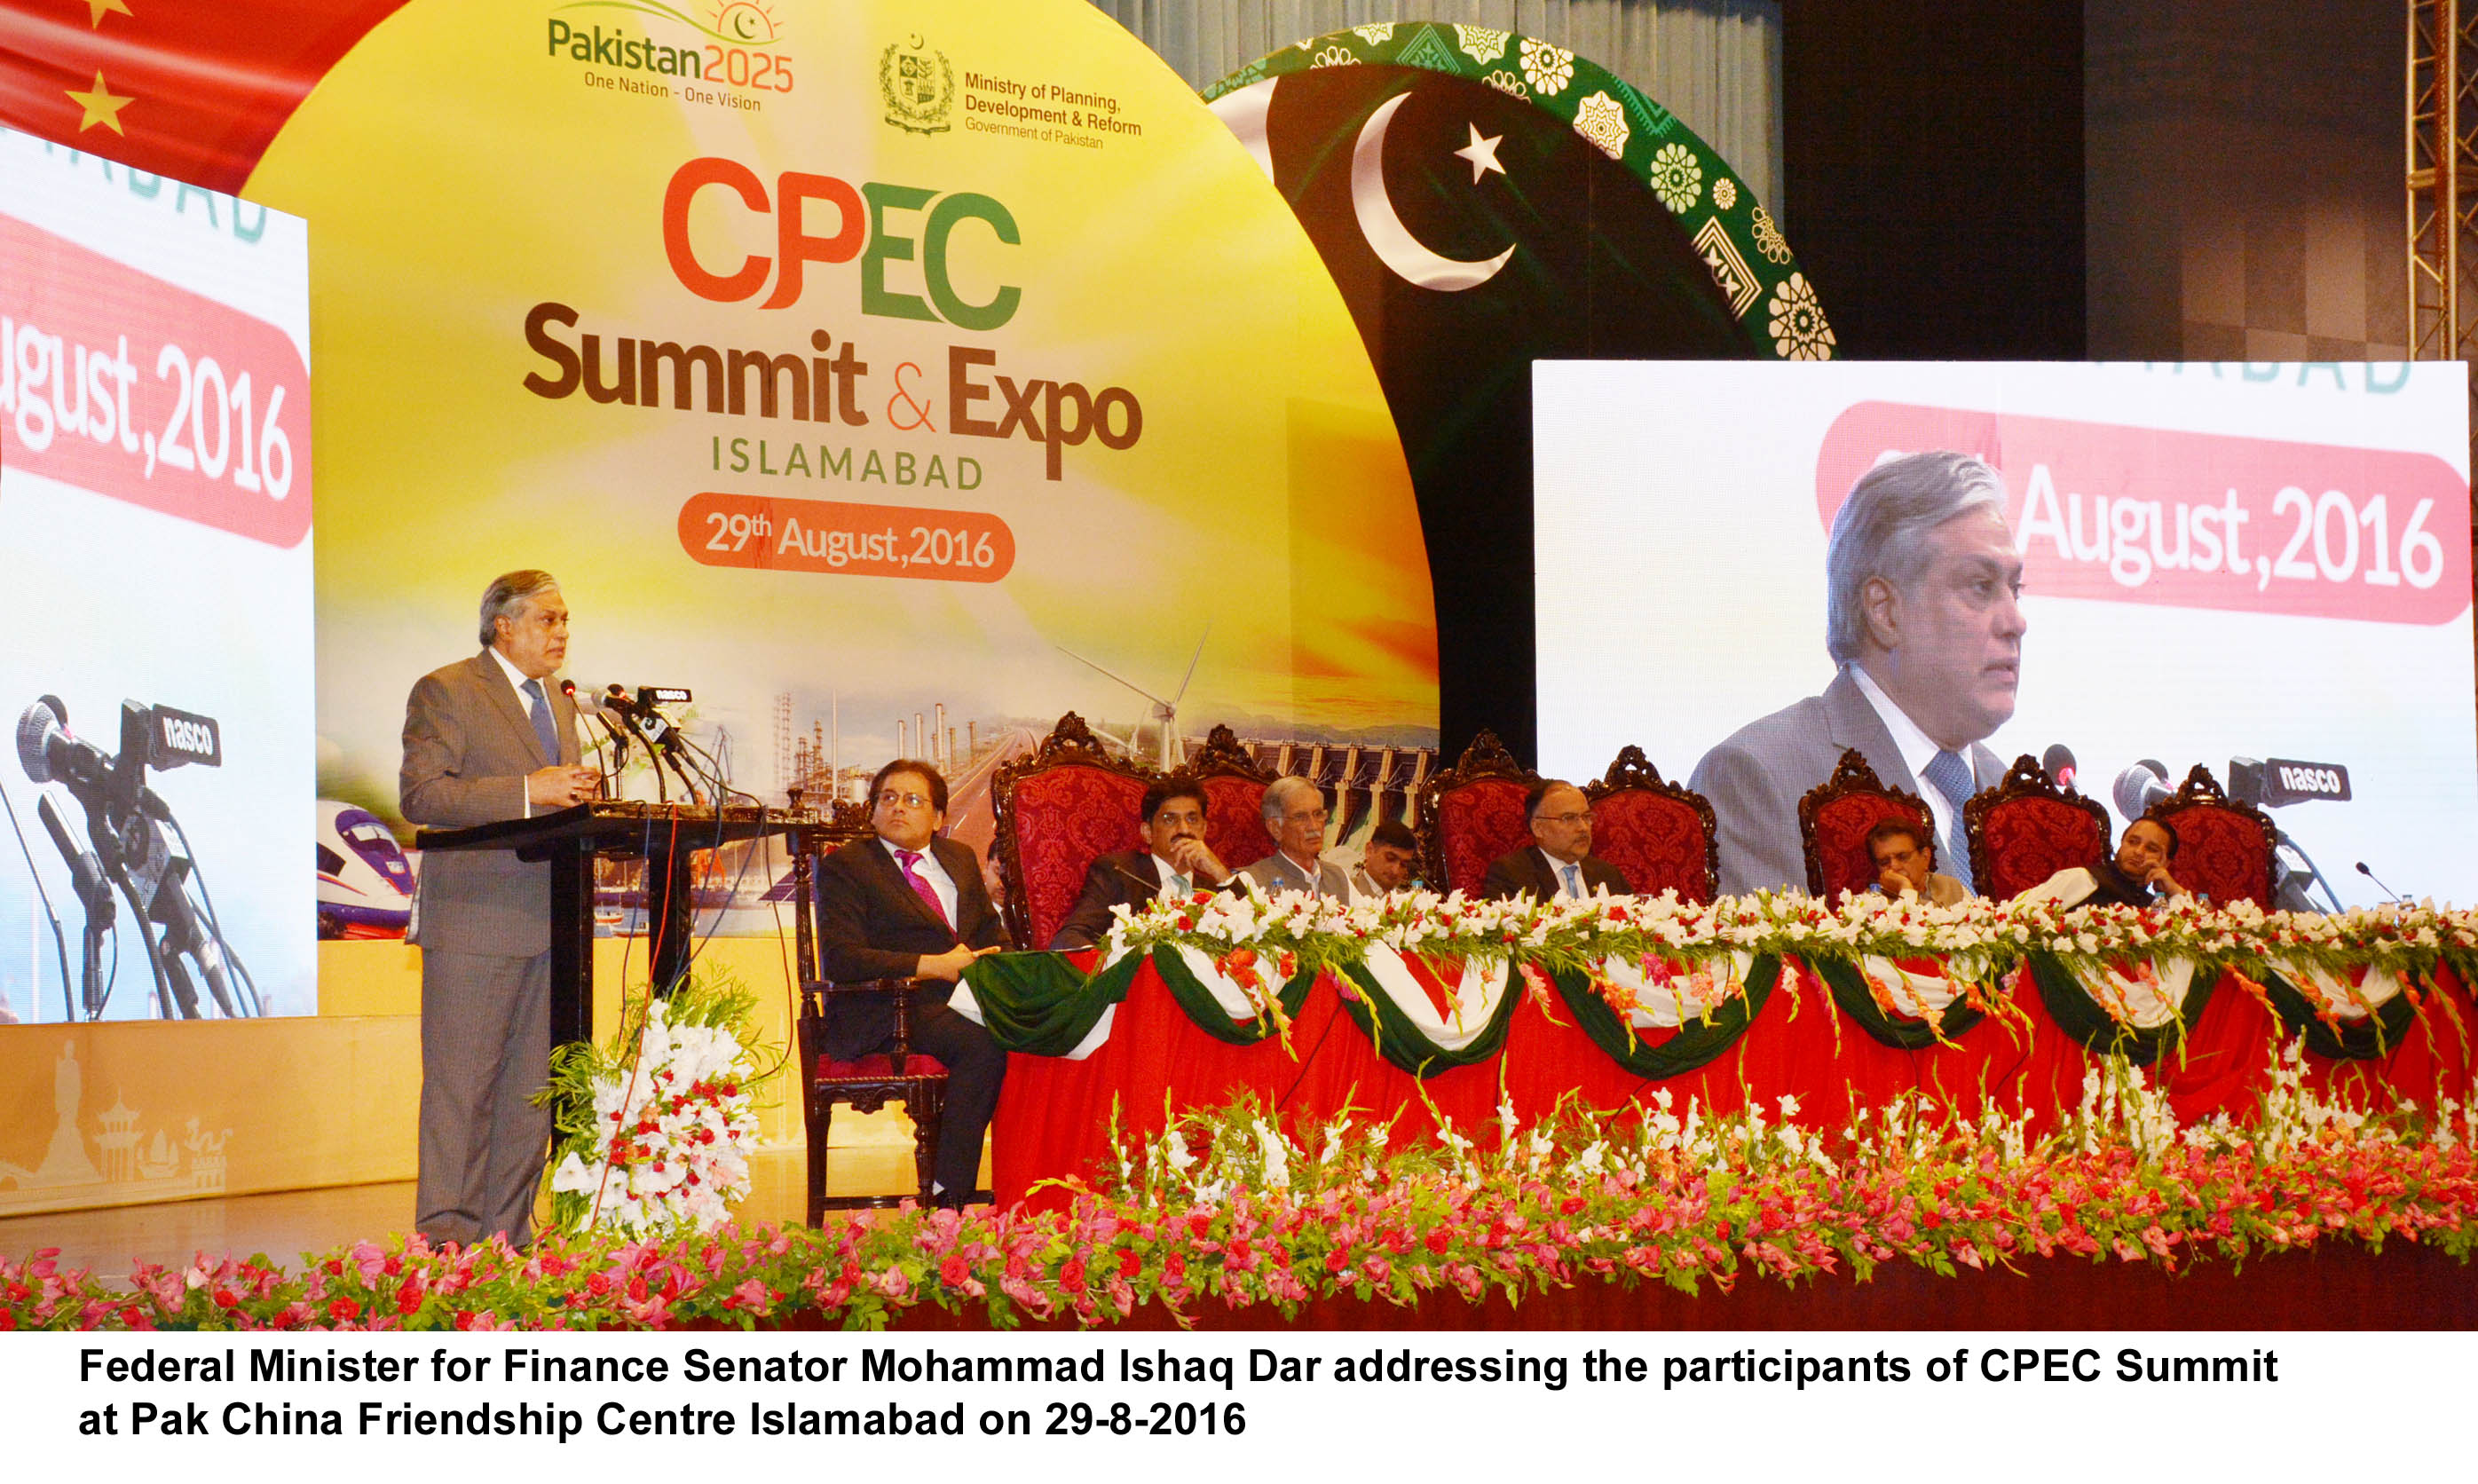 CPEC Summit & Expo on  29th August  2016 at Islamabad